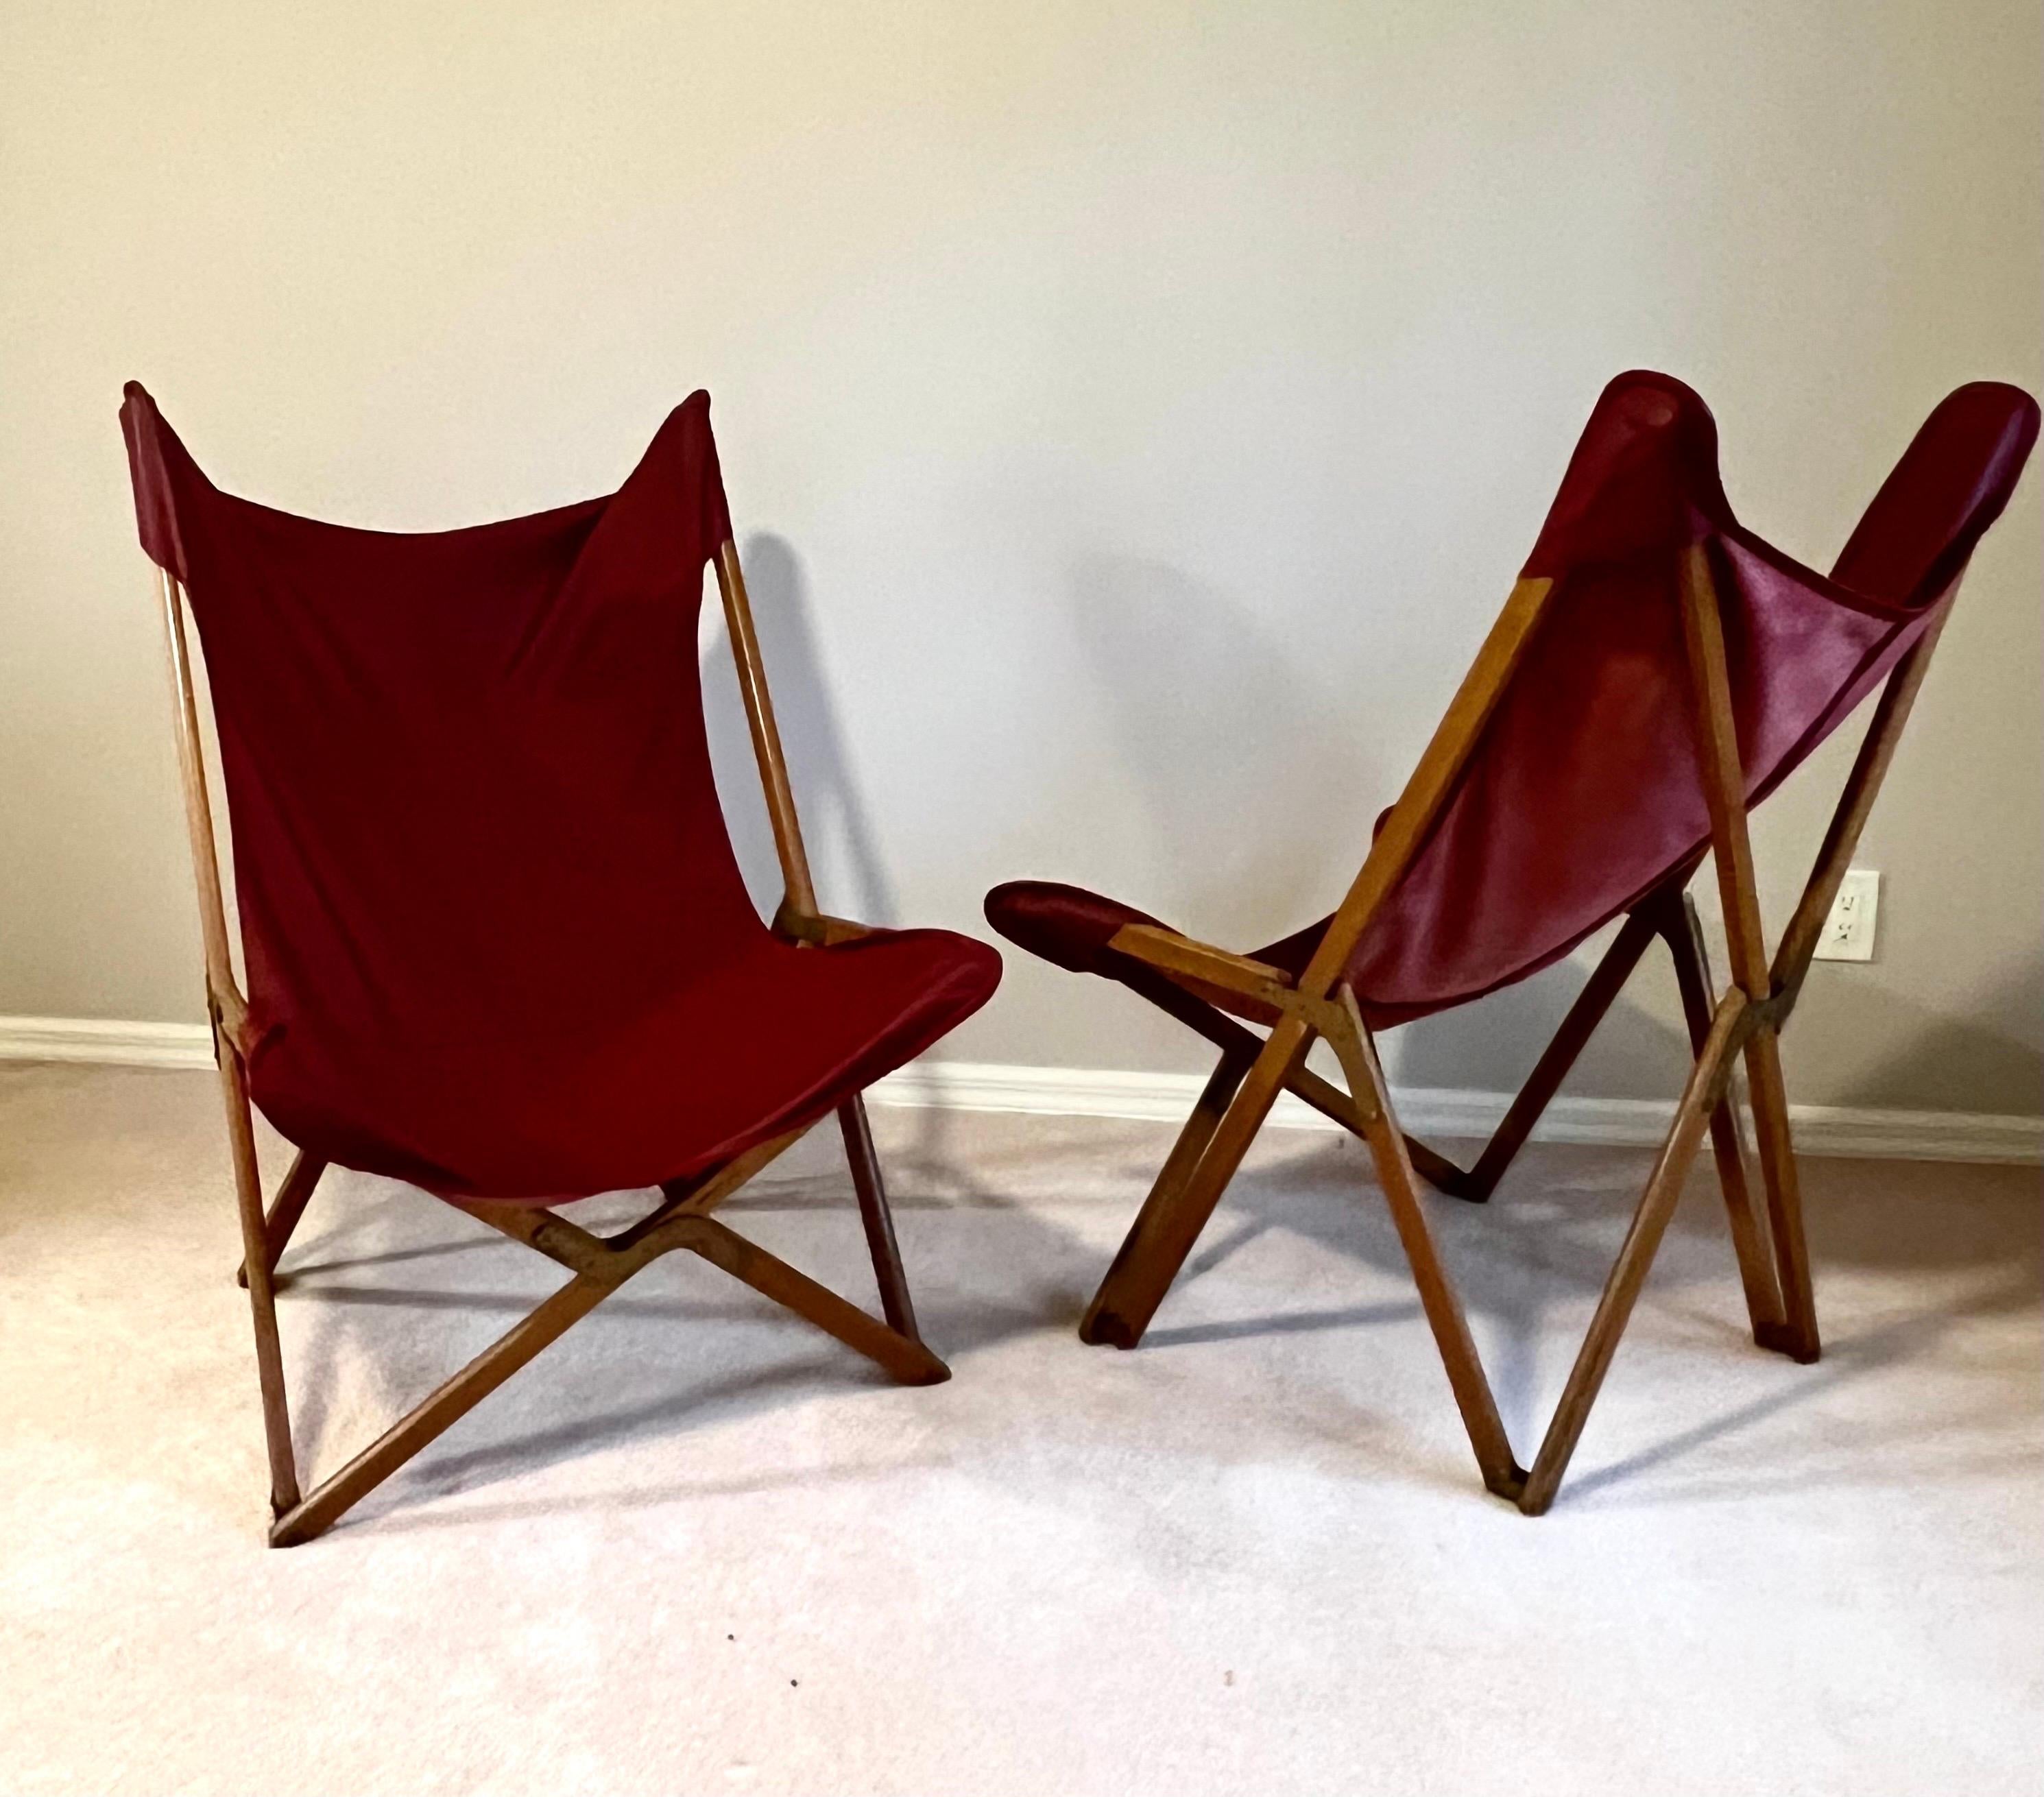 A rare and inportant pair of the 'Tripolina' folding chairs designed by Joseph B. Fenby. Tripolina folding chairs present a wooden frame with metal fixings and a beautiful removable seat realized in high-quality leather. These lounge chairs are